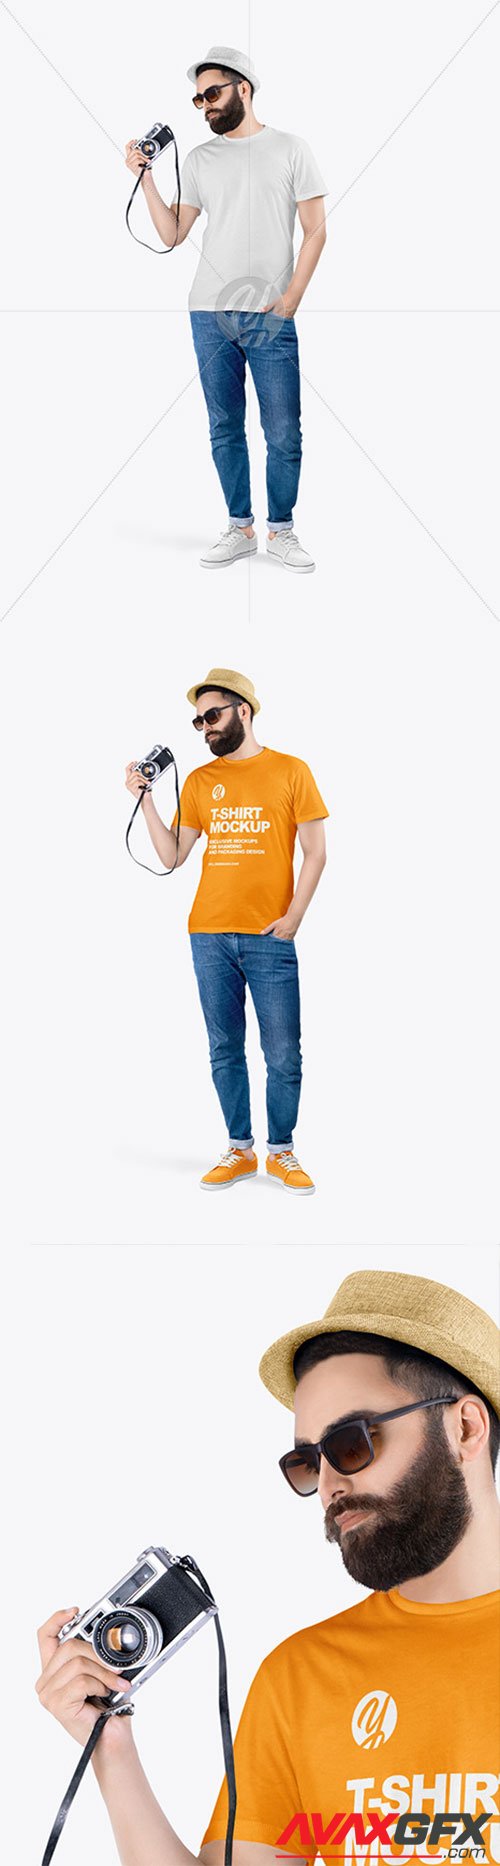 Man in a T-Shirt and Jeans Mockup 62707